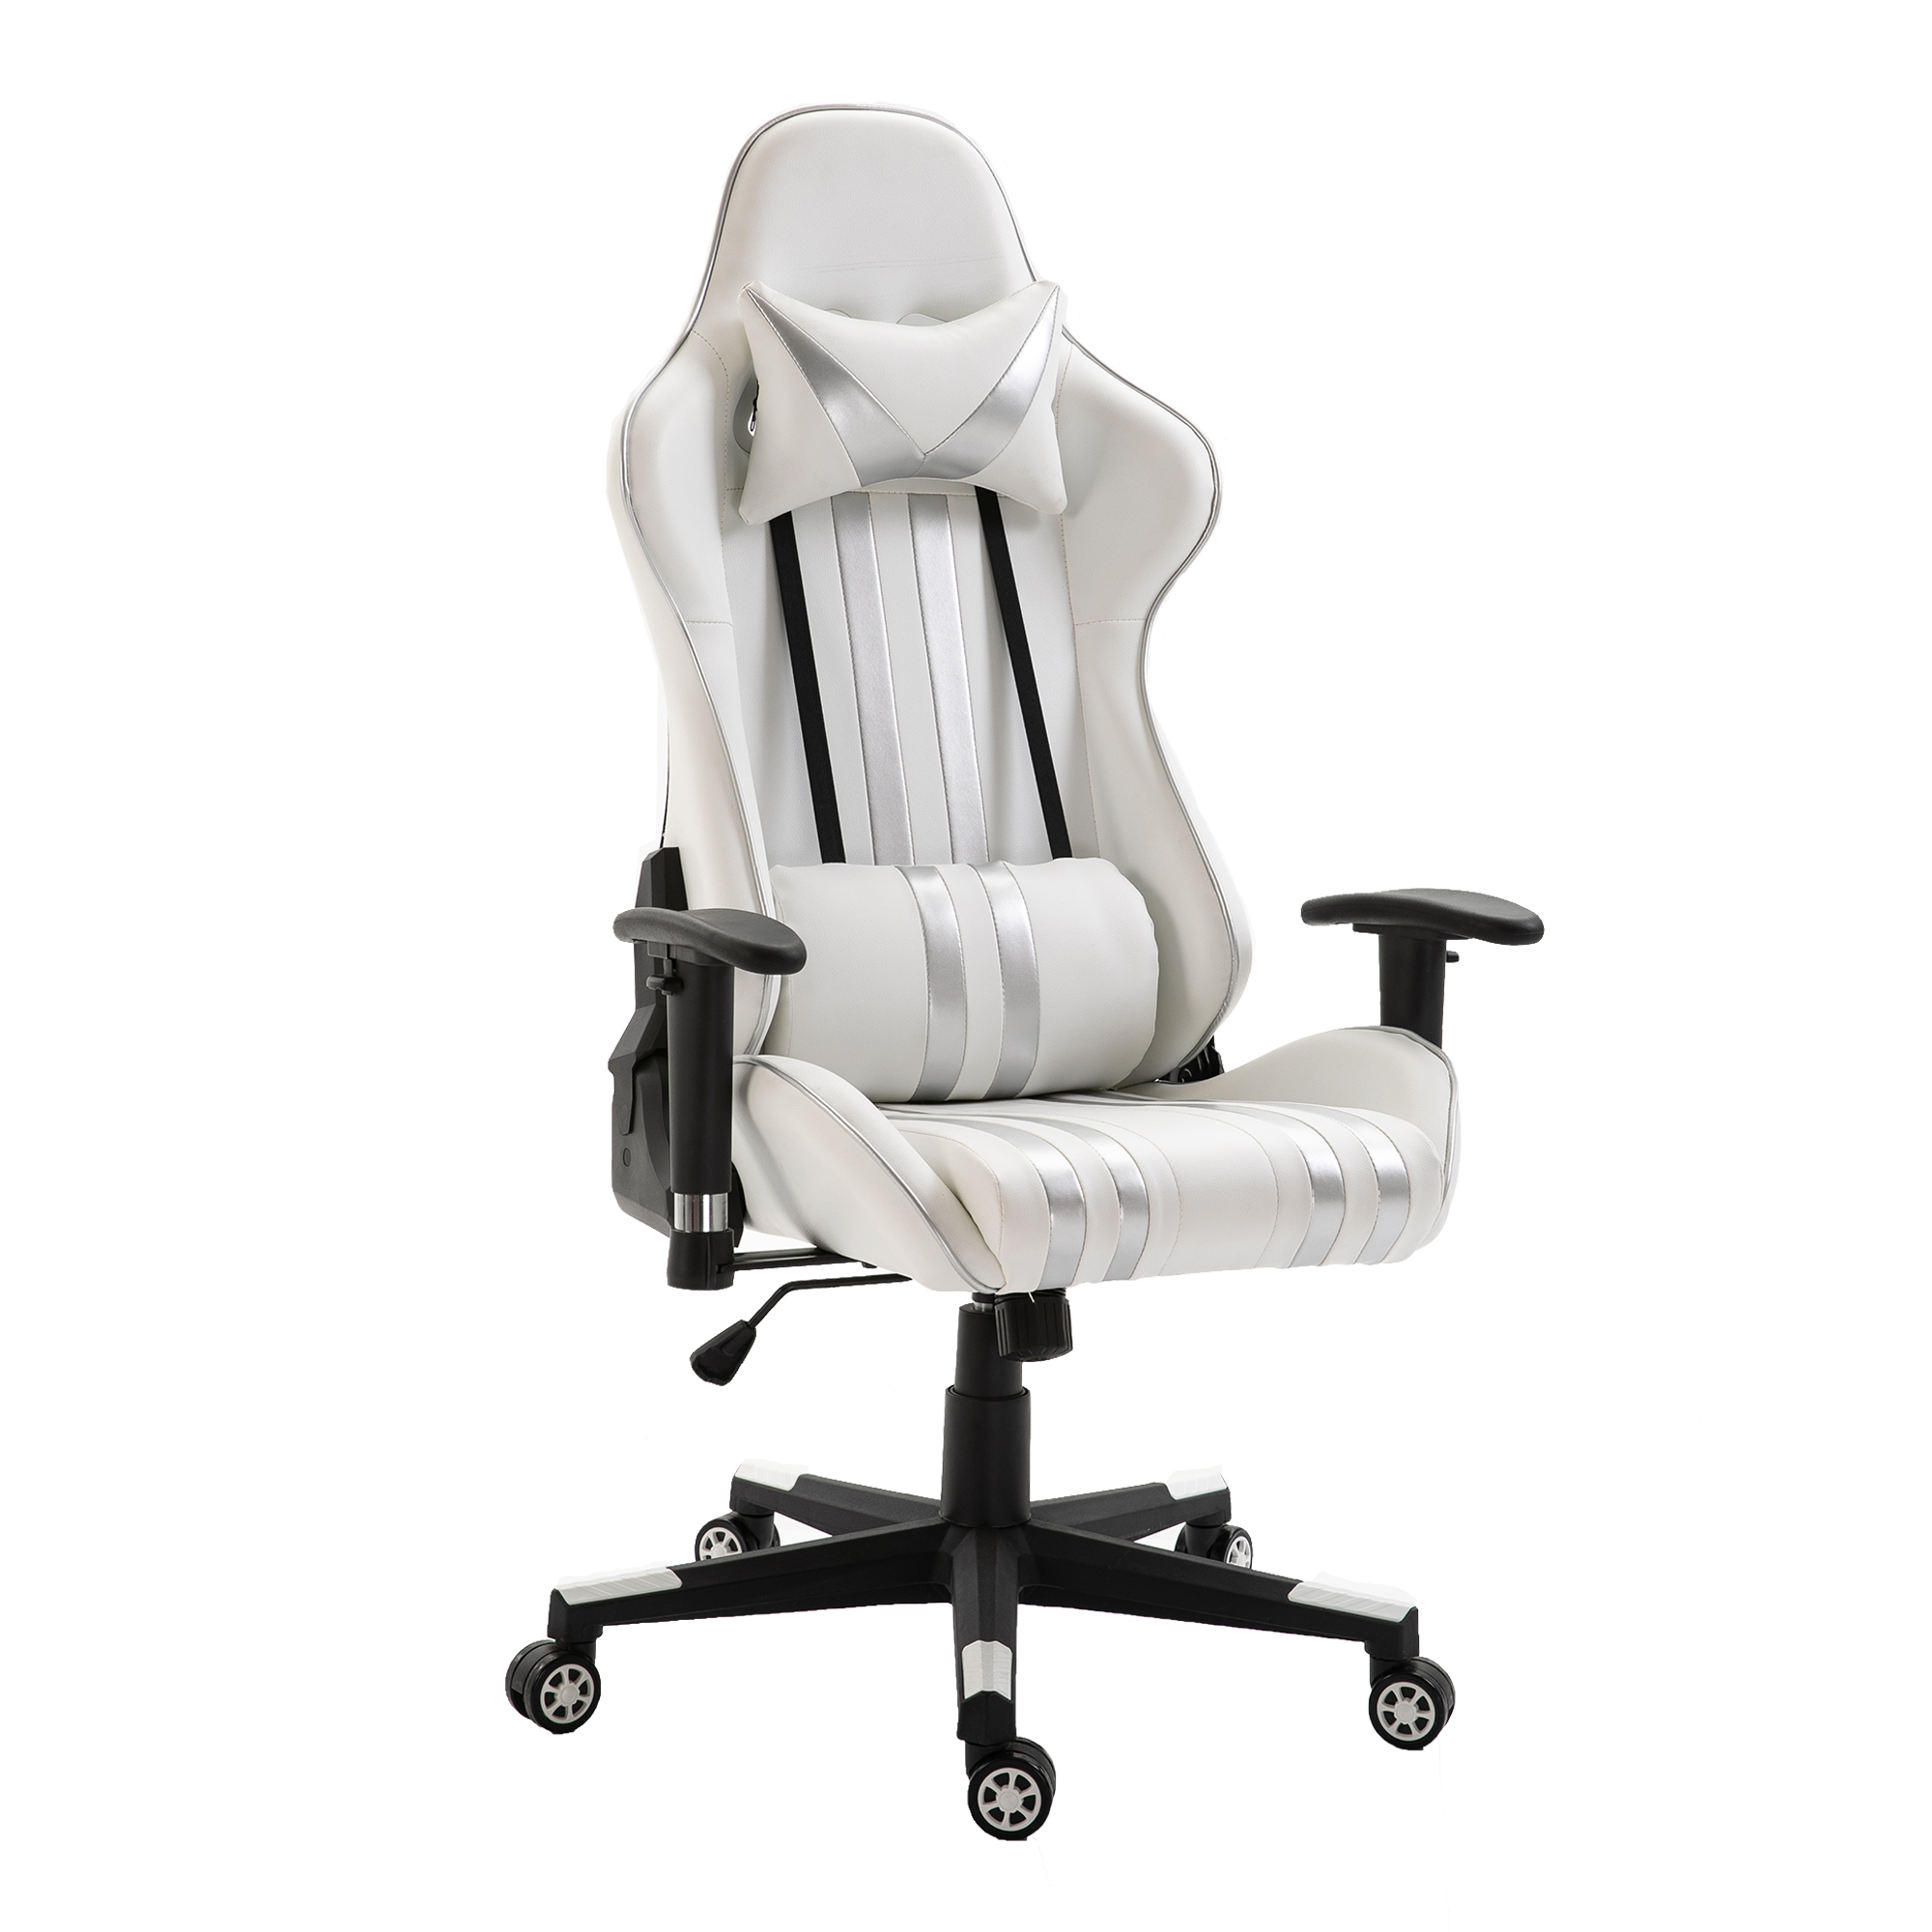 OEM High Quality No Sofa Living Room Factories –  Customized good quality rotating and comfortable ergonomic backrest gaming chair – ANJI JIFANG